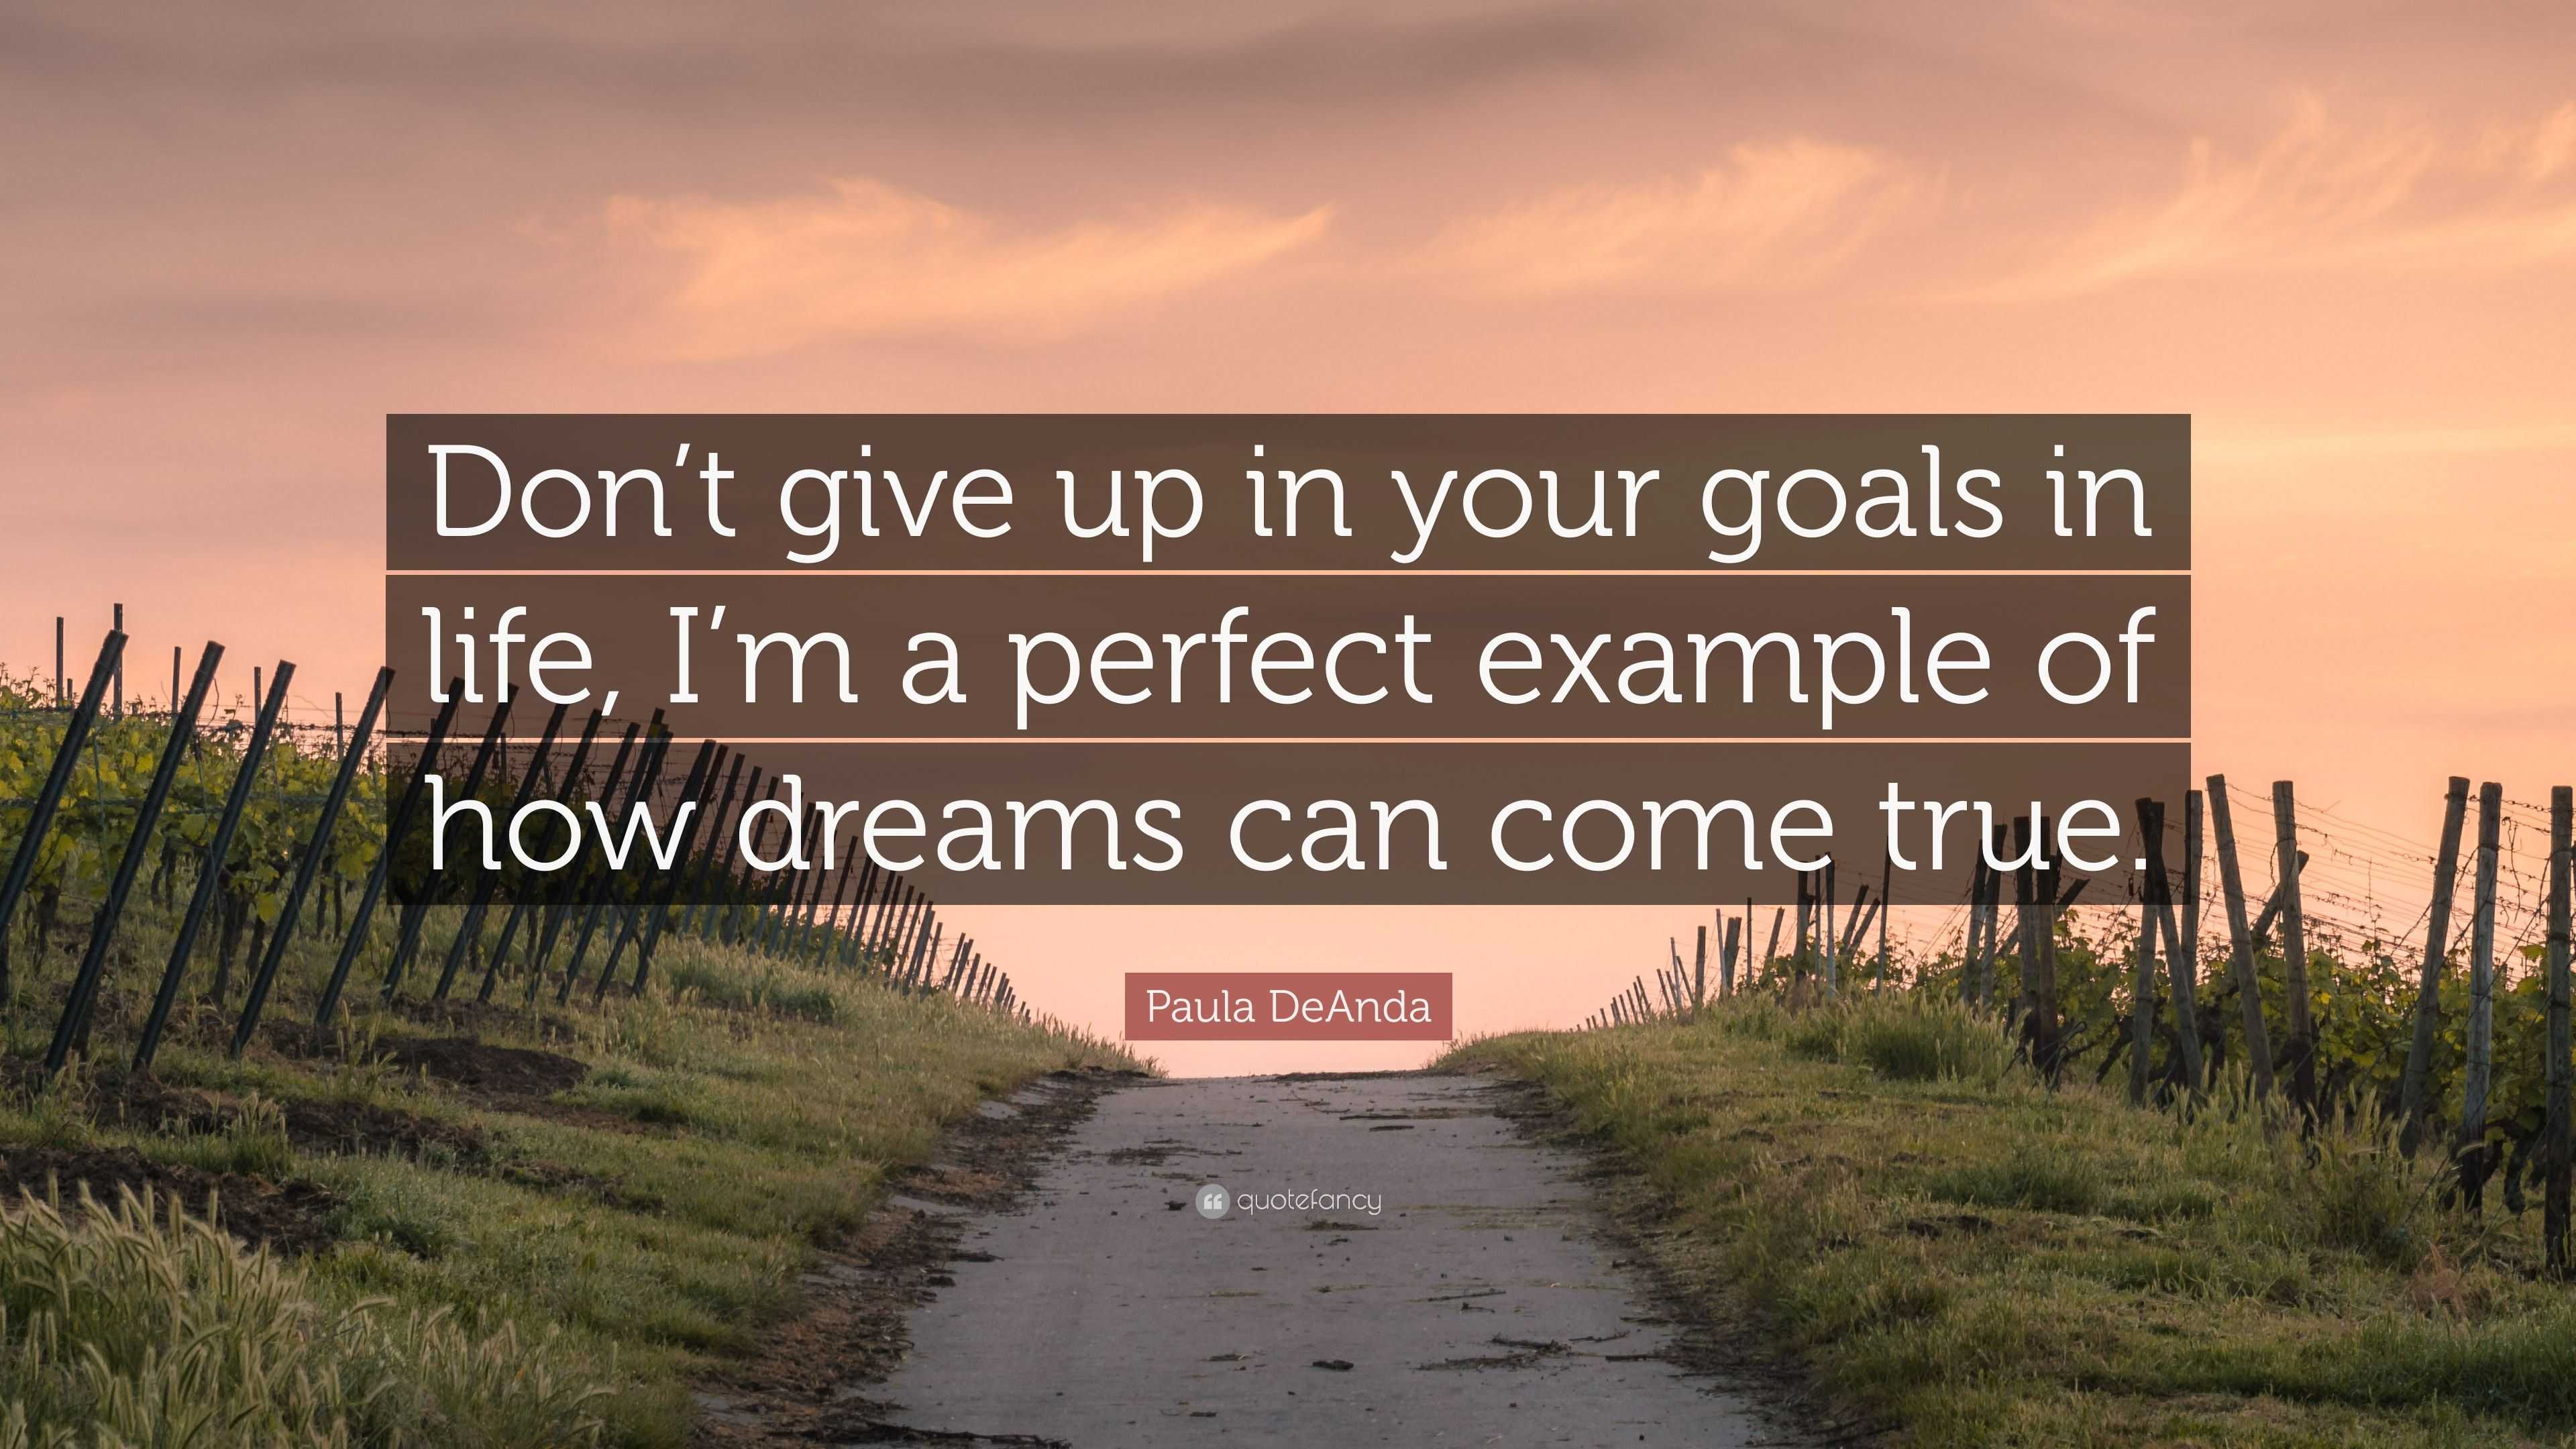 Paula DeAnda Quote: “Don’t give up in your goals in life, I’m a perfect ...